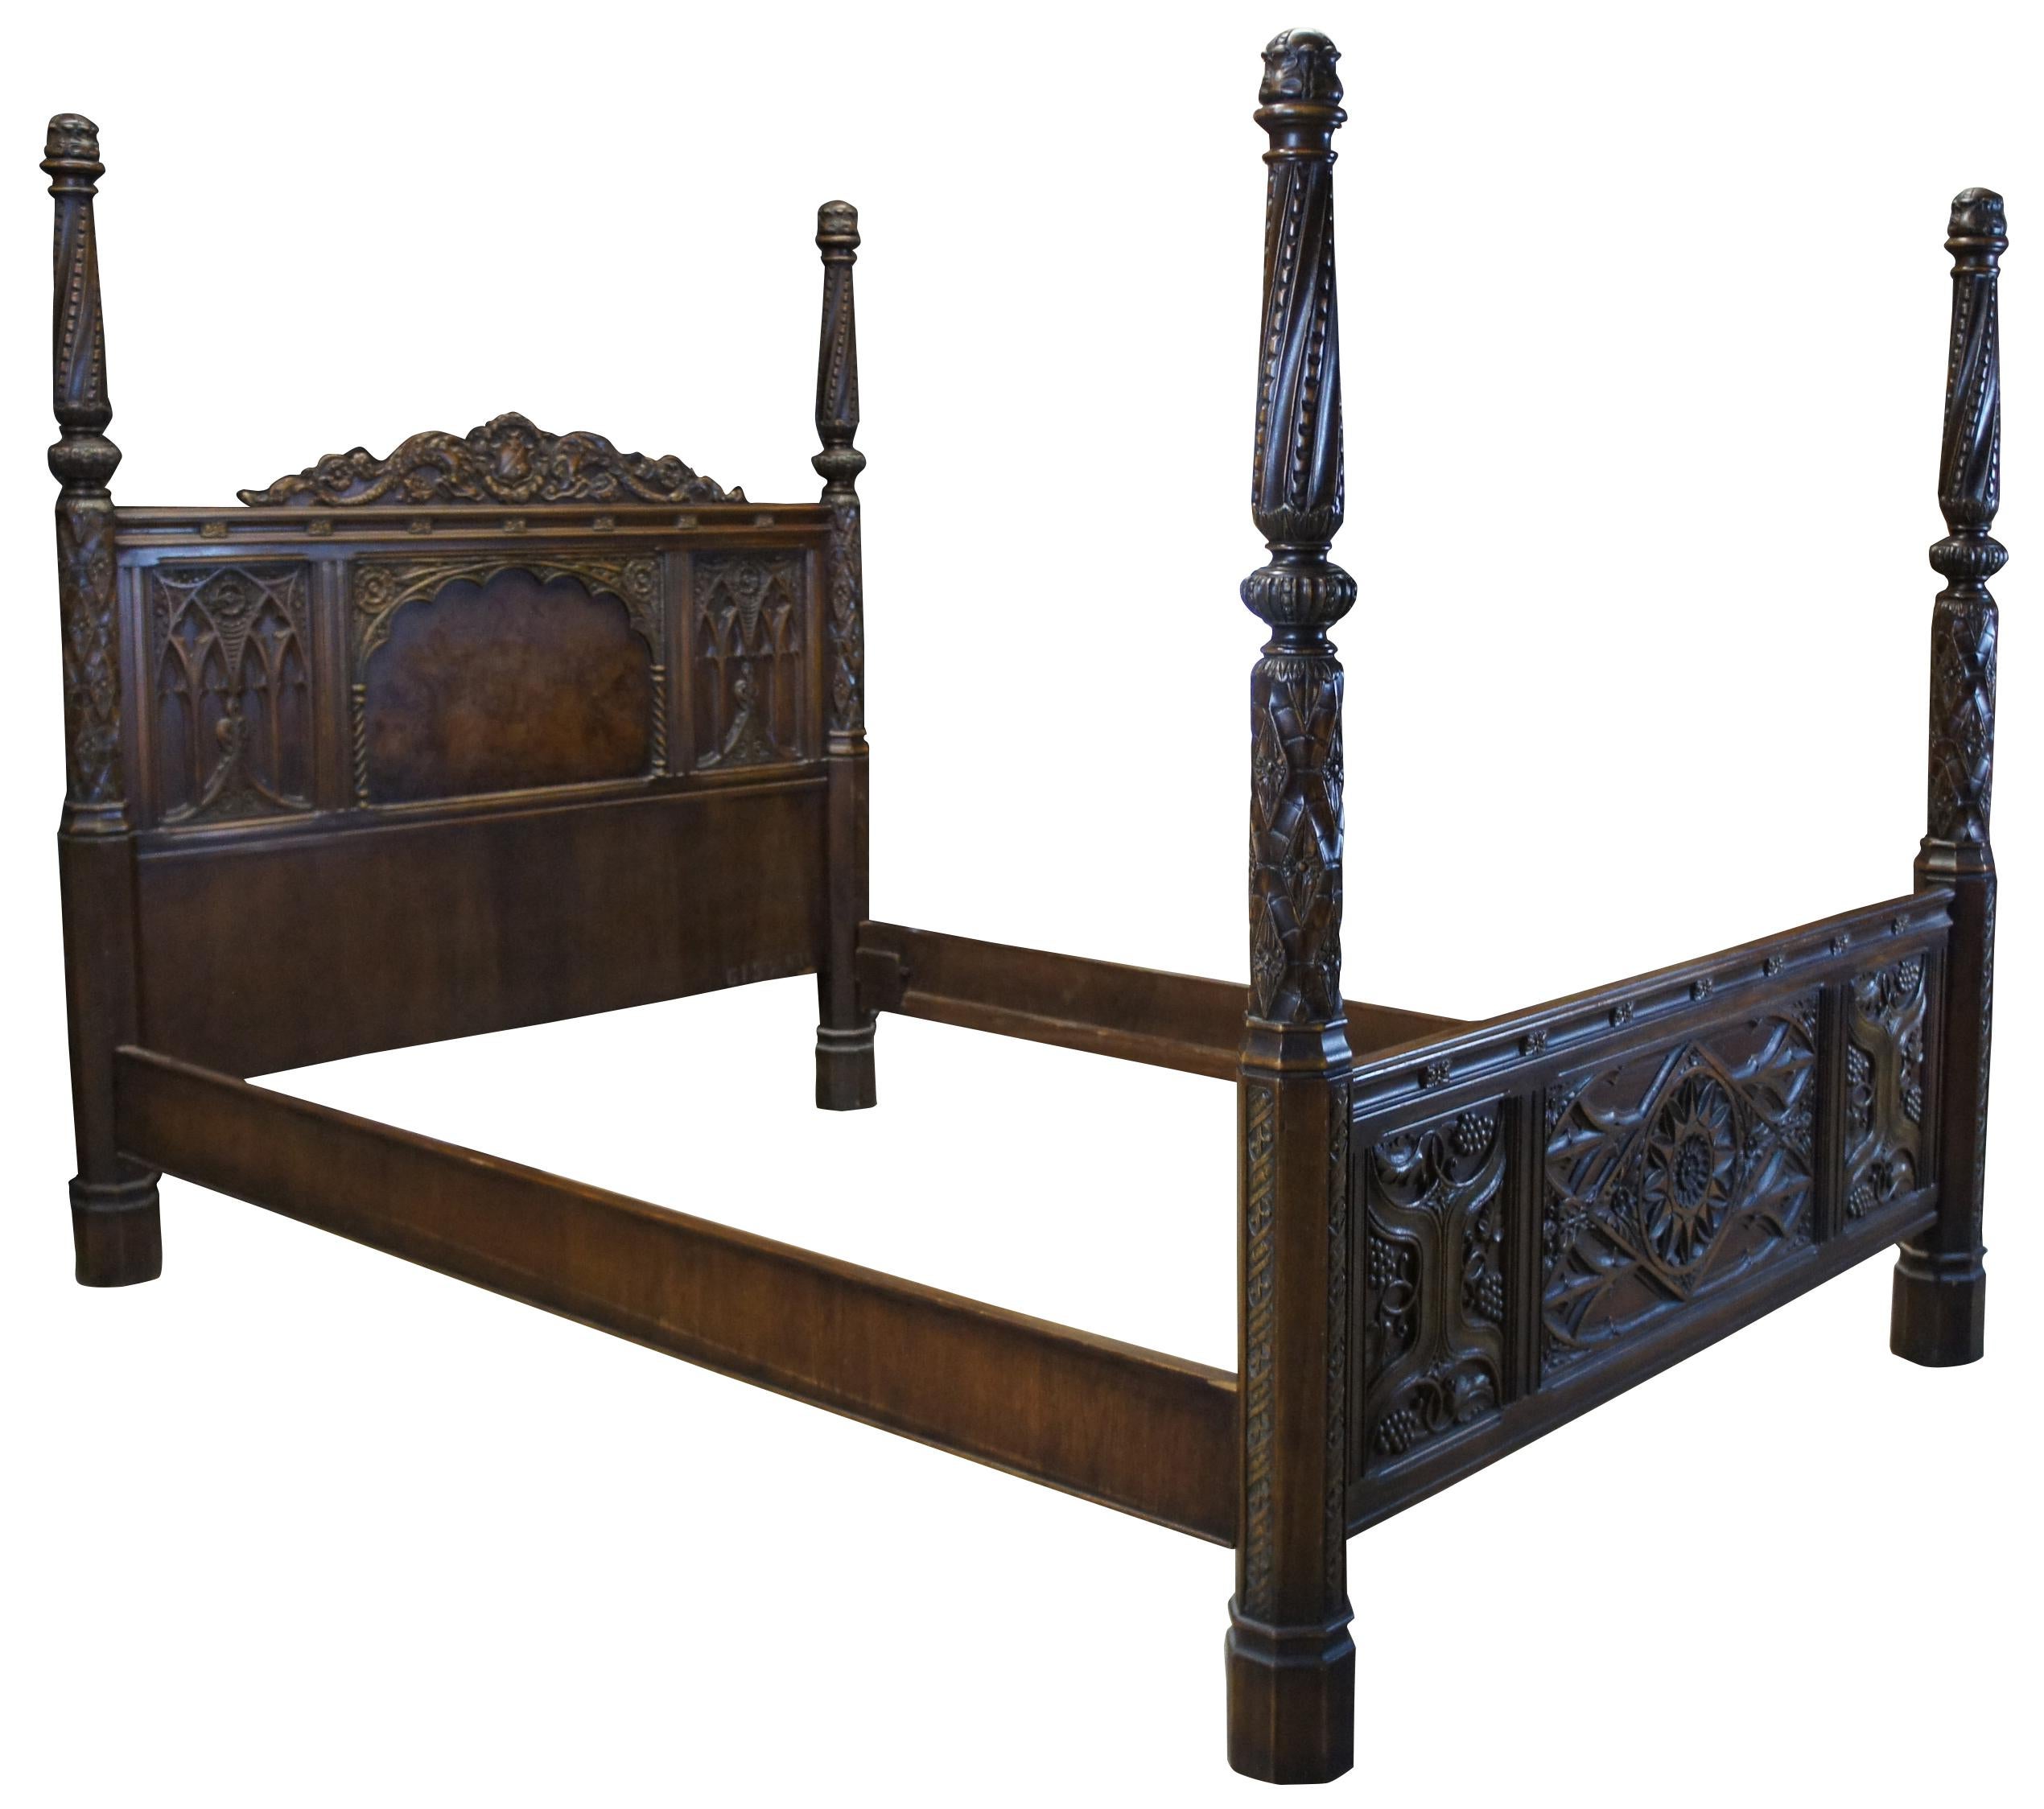 American Furniture Company Gothic or Spanish Renaissance Revival bed. Operating out of Batesville Indiana since 1899, they worked closely and collaborated in part with Romweber. Specializing in high grade bedroom suites and furniture. Made from